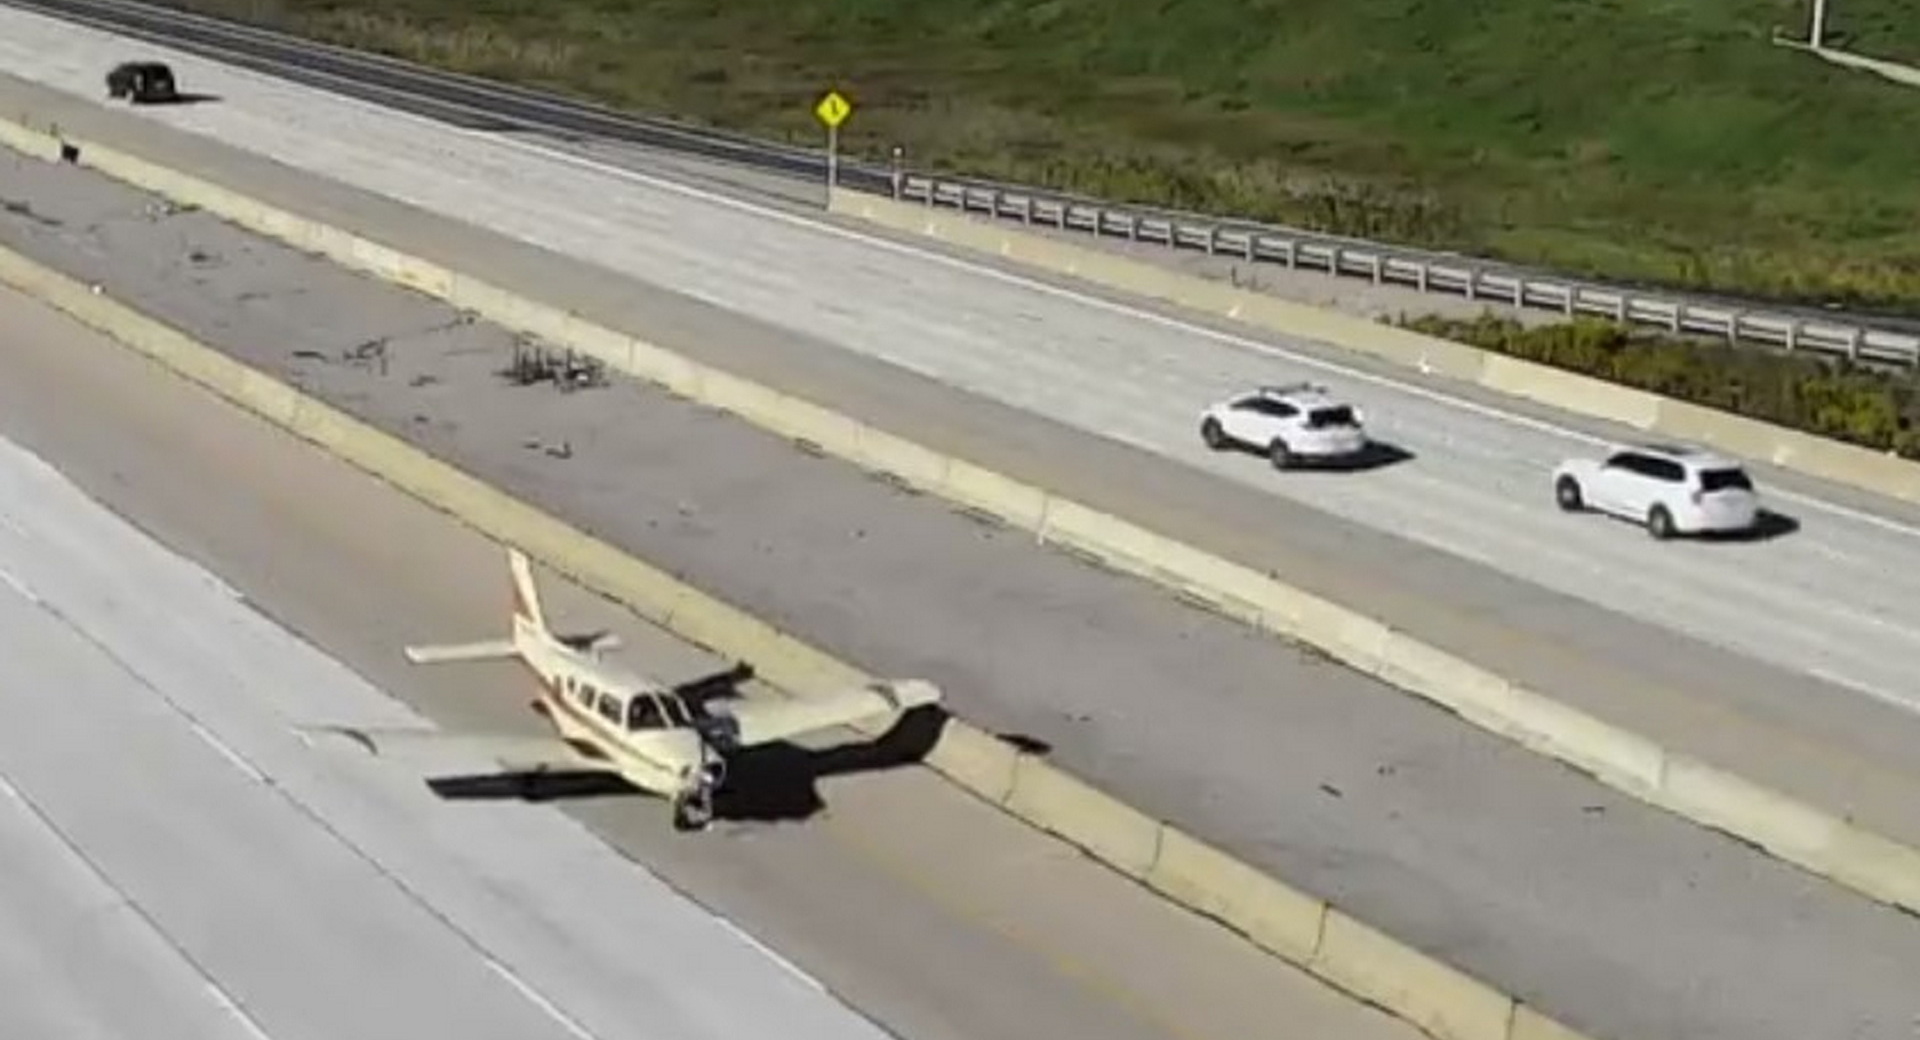 Watch A Plane Make An Emergency Landing On 10 Lane Stretch Of Canadian Highway Carscoops 3570